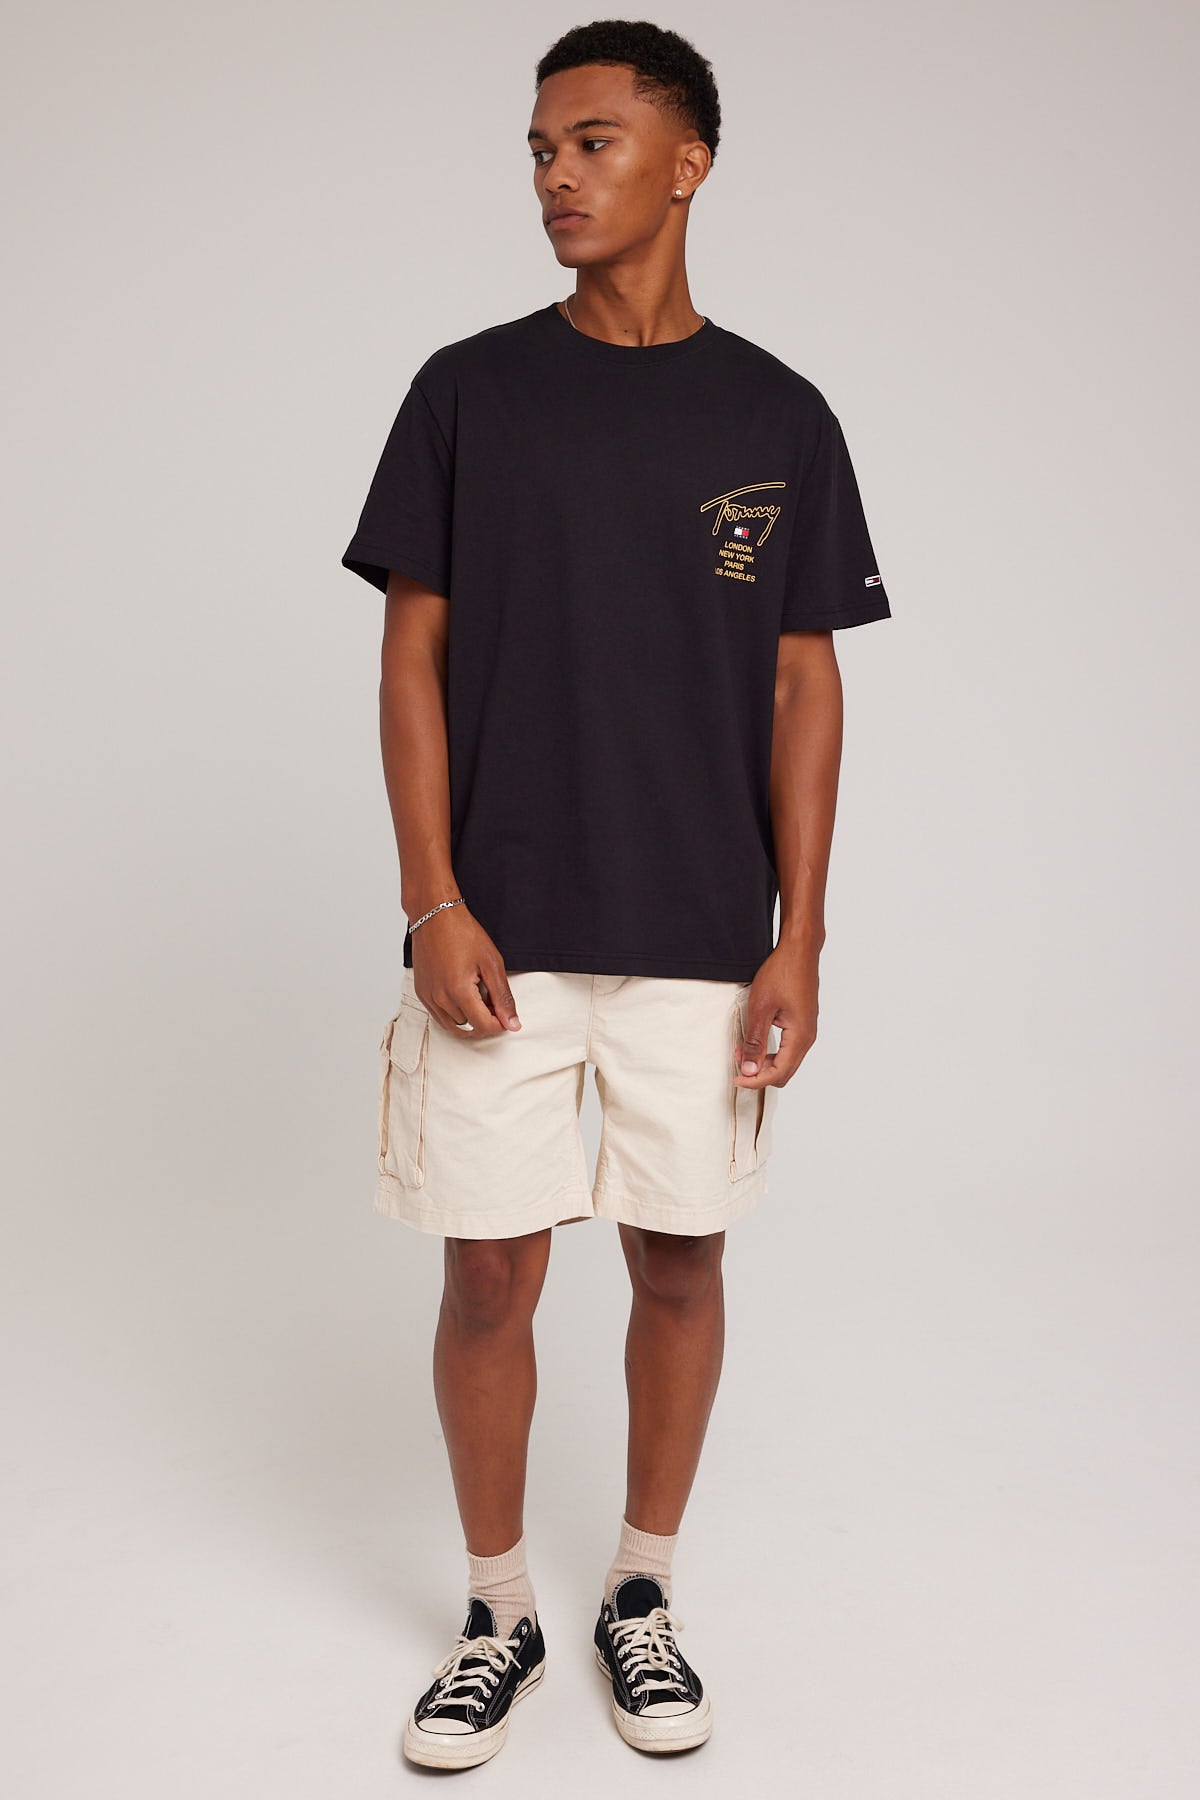 Tommy Jeans TJM Classic Gold Signature Back Tee Black